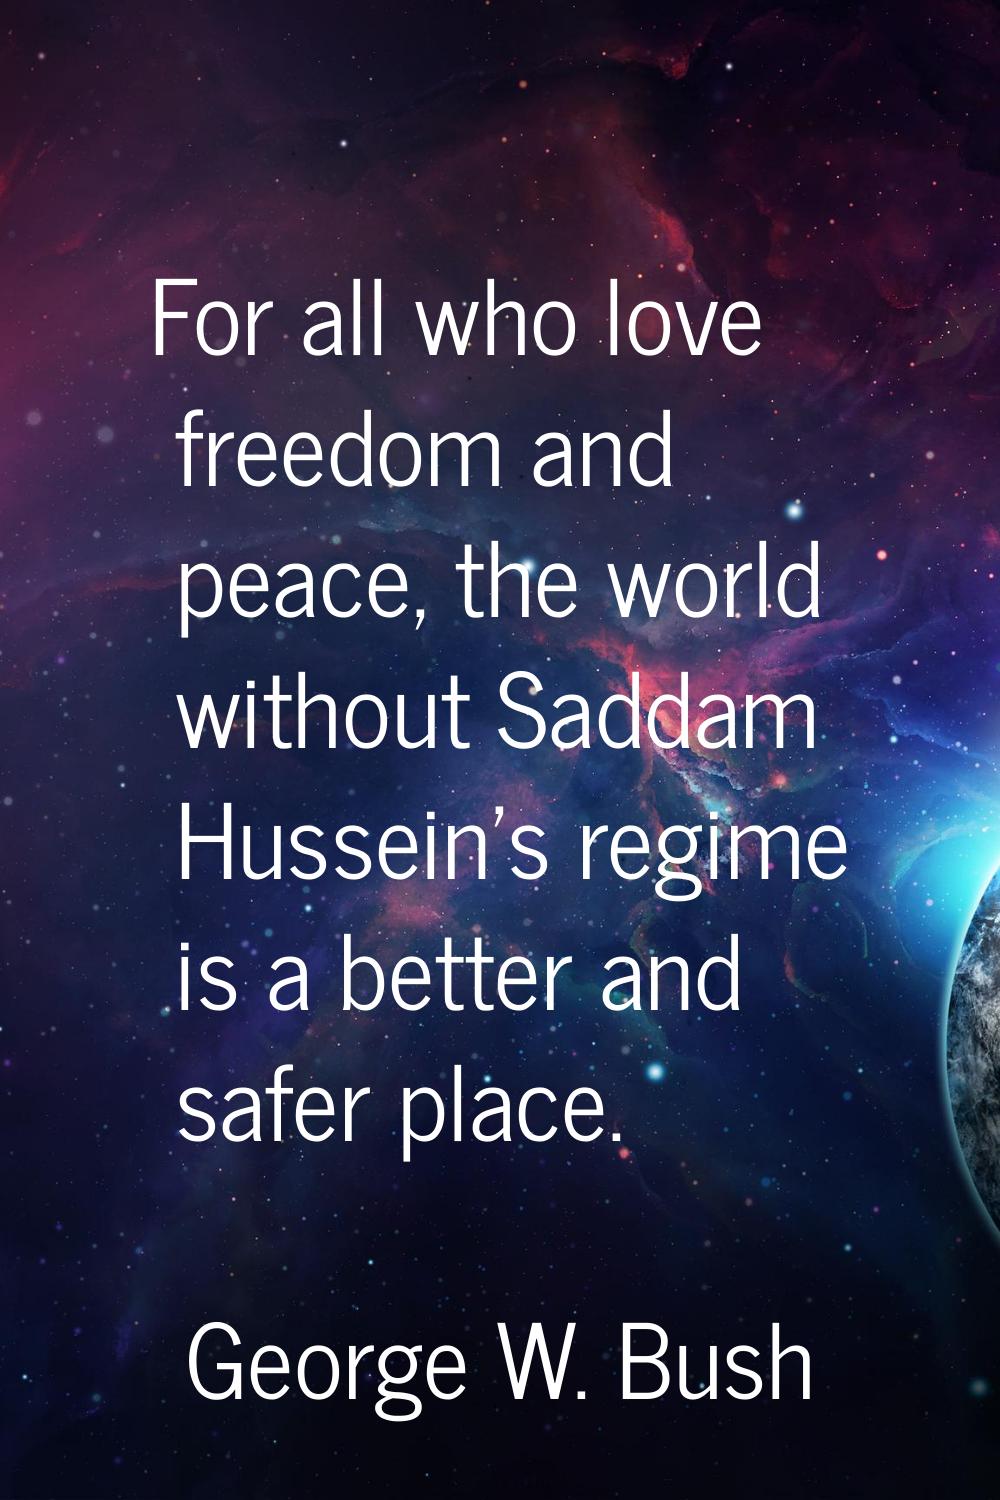 For all who love freedom and peace, the world without Saddam Hussein's regime is a better and safer